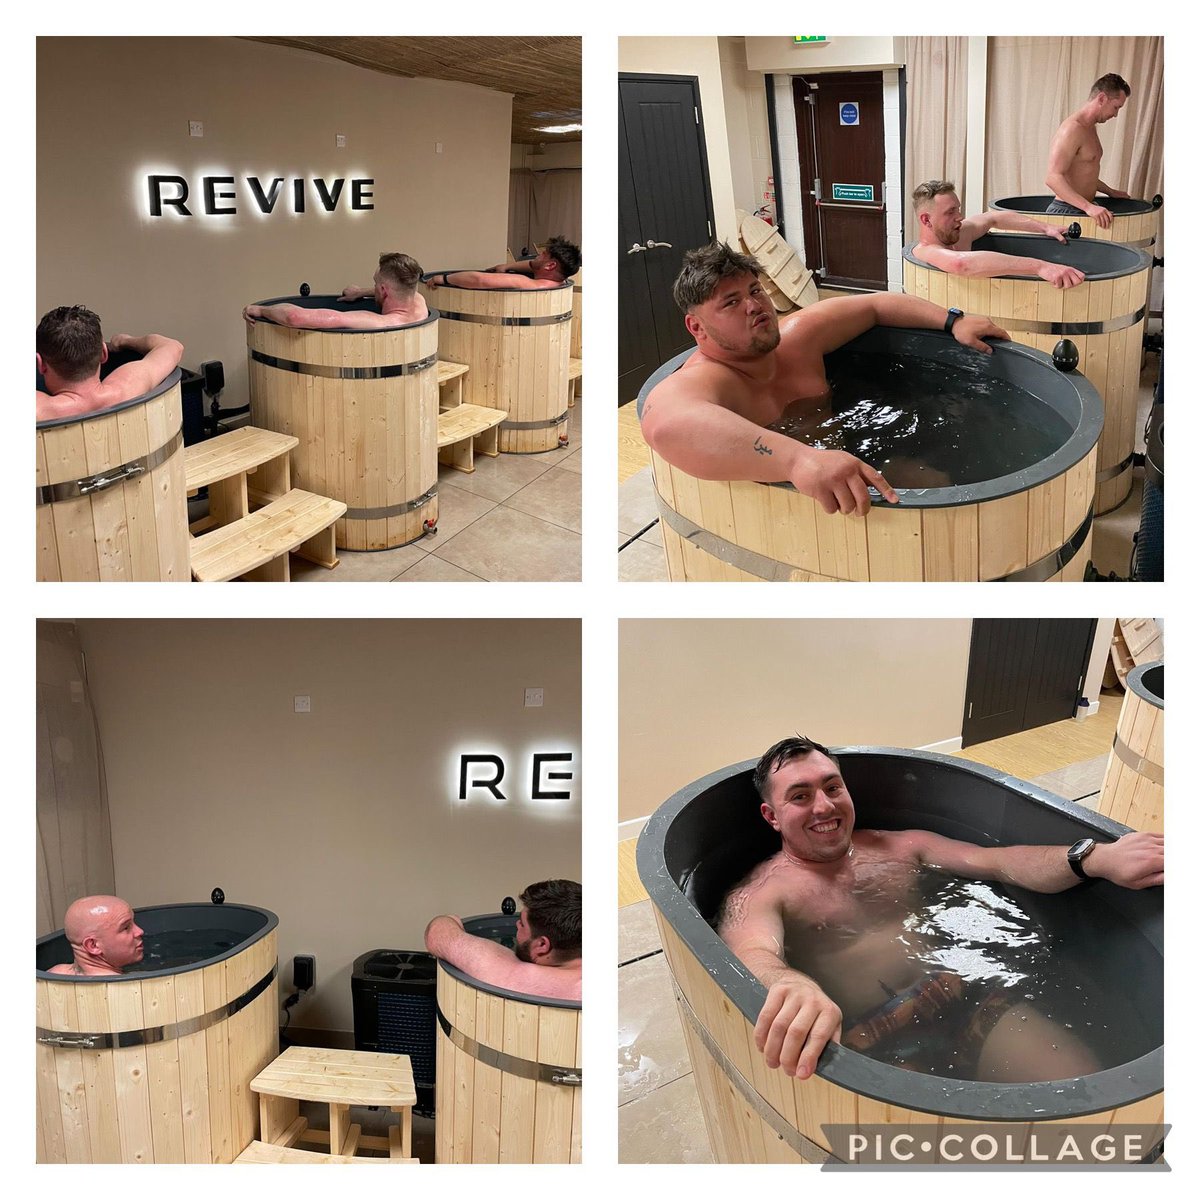 A big thanks to Revive Cowbridge for their support and use of their hot and cold therapy facilities tonight. After a tough run in to end of the season the boys were happy to try and ease the aches and niggles. Looking forward to working together next year #wheelers #wellness